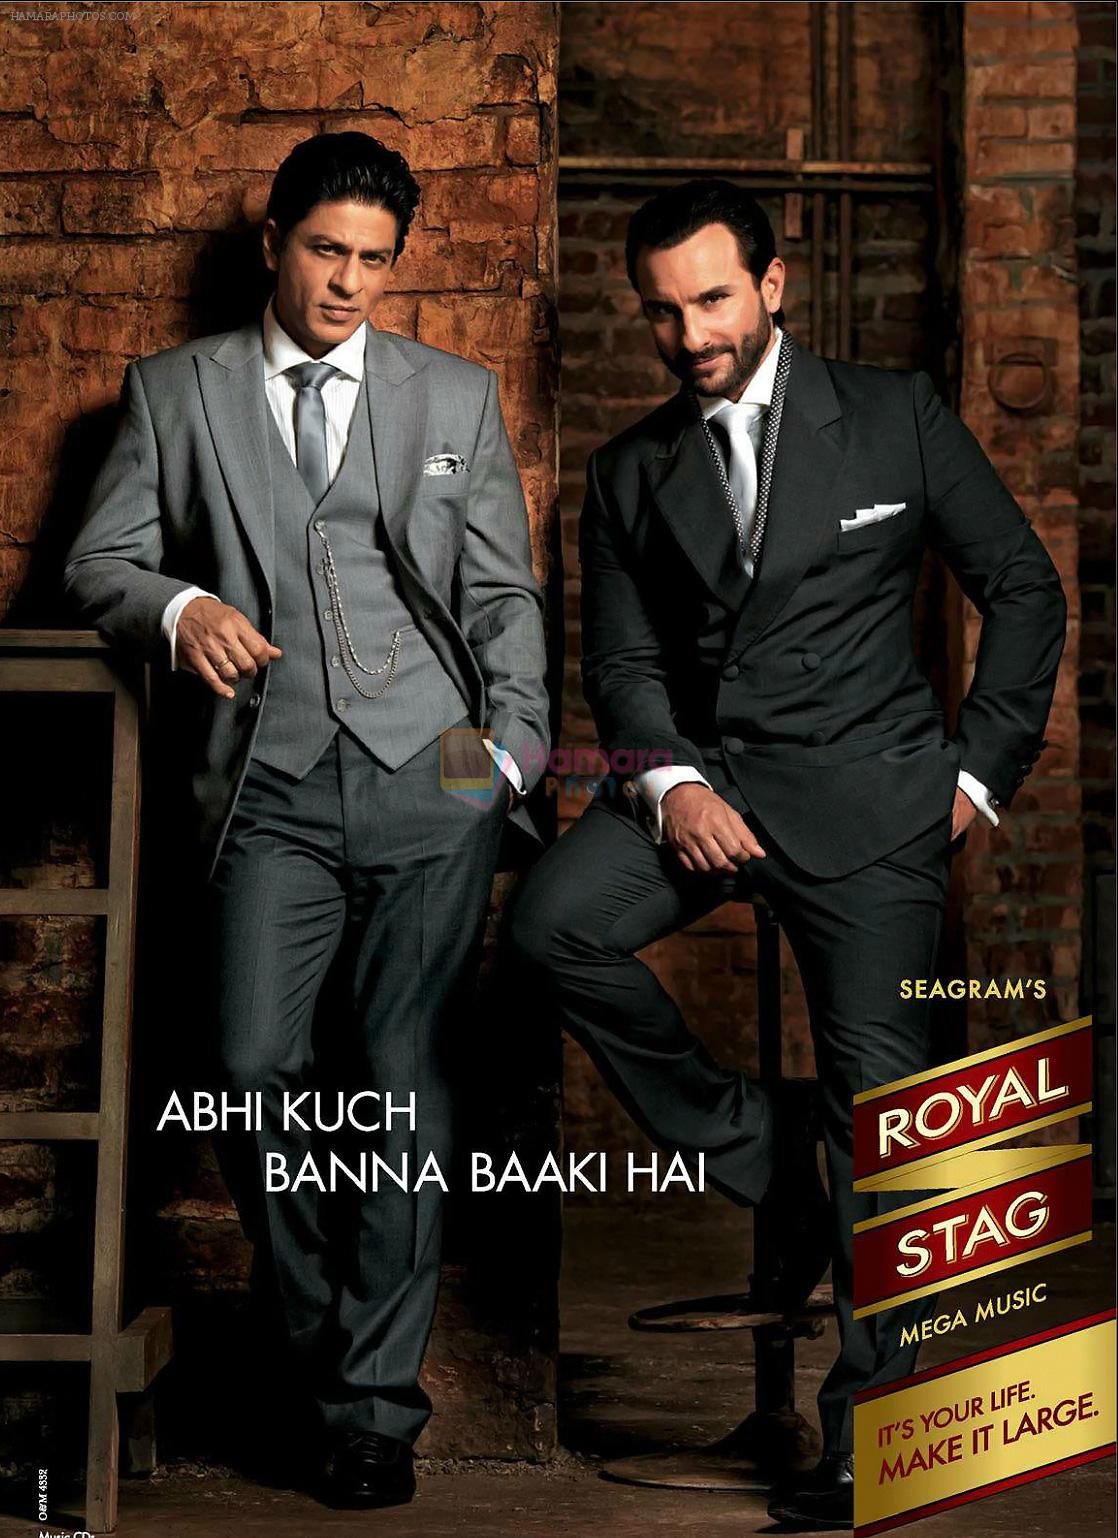 Shahrukh and Saif Ali Khan in Seagram's Royal Stag Ad shown to user